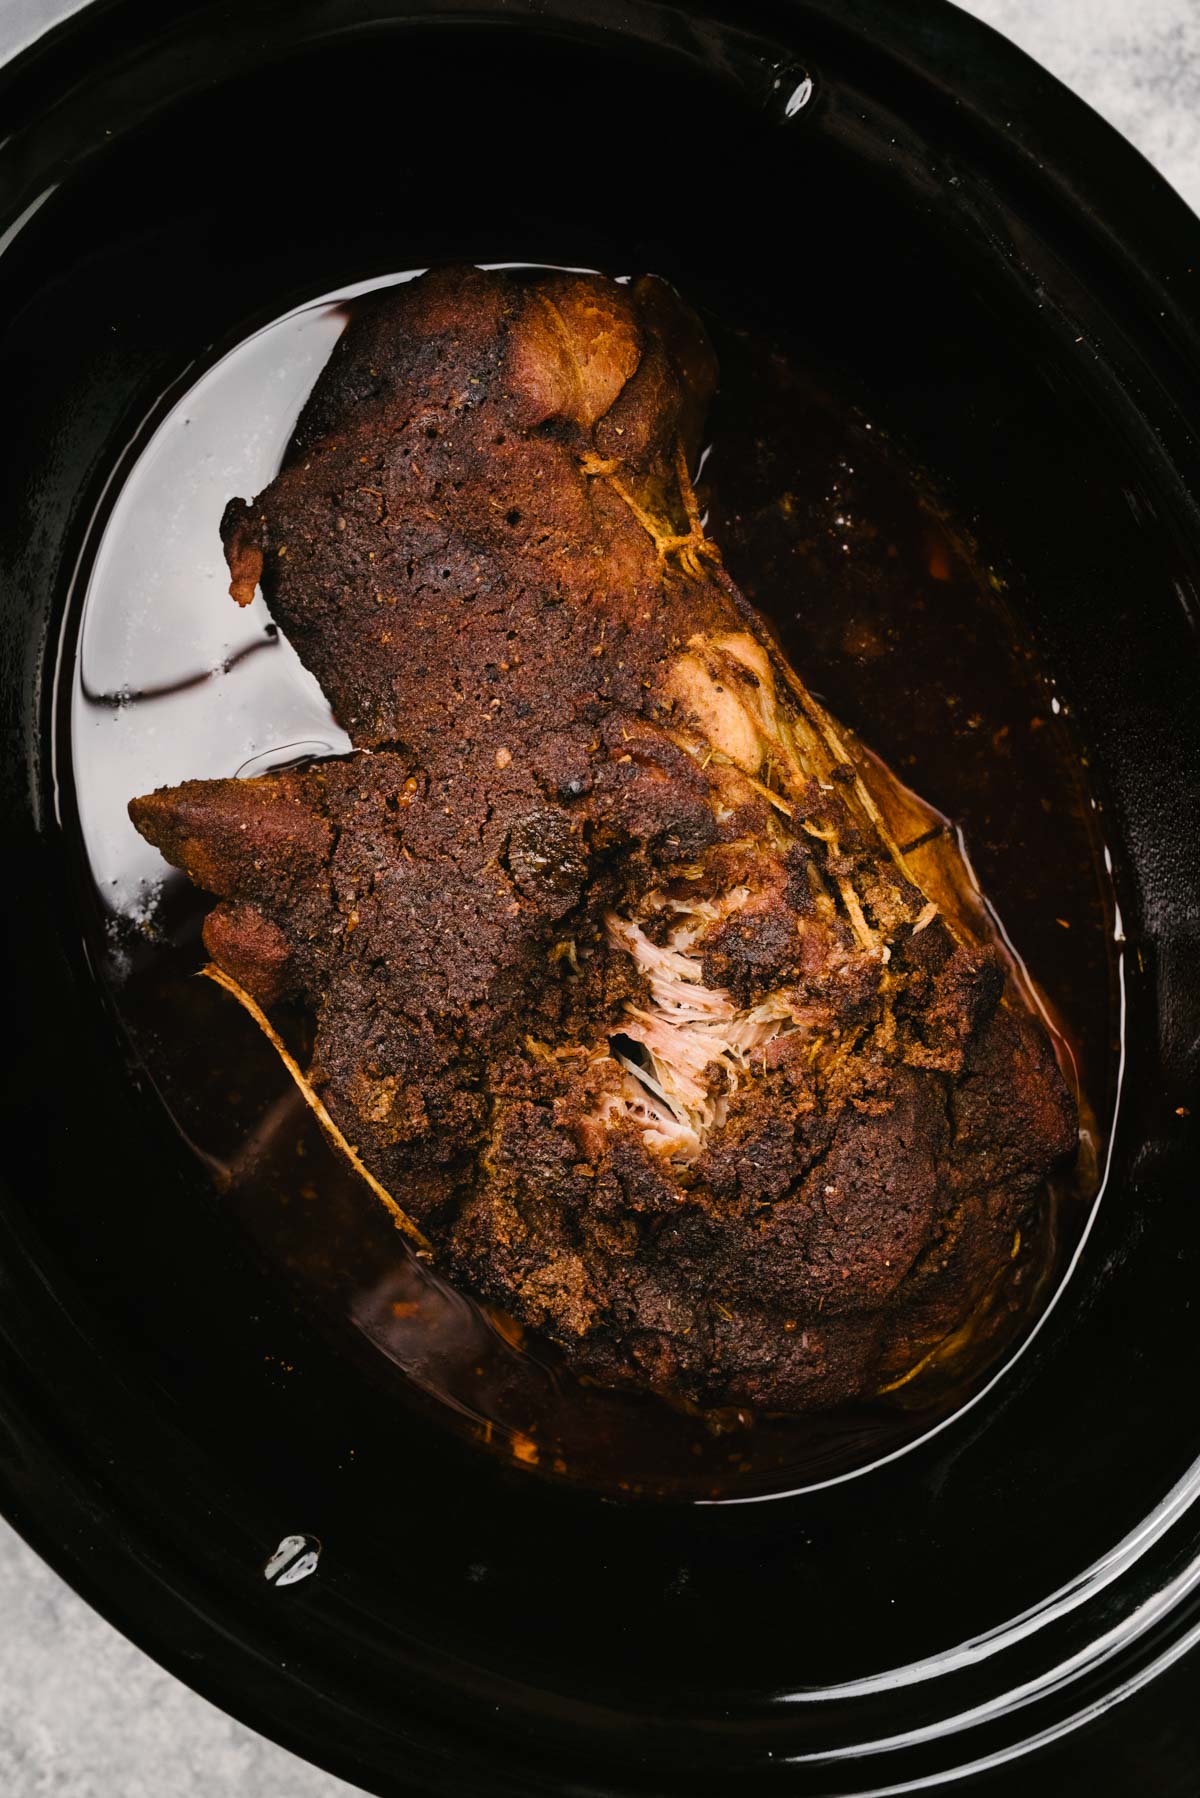 A cooked Boston butt pork roast in a crockpot with a portion of the pork "pulled" to show it has been cooked through.